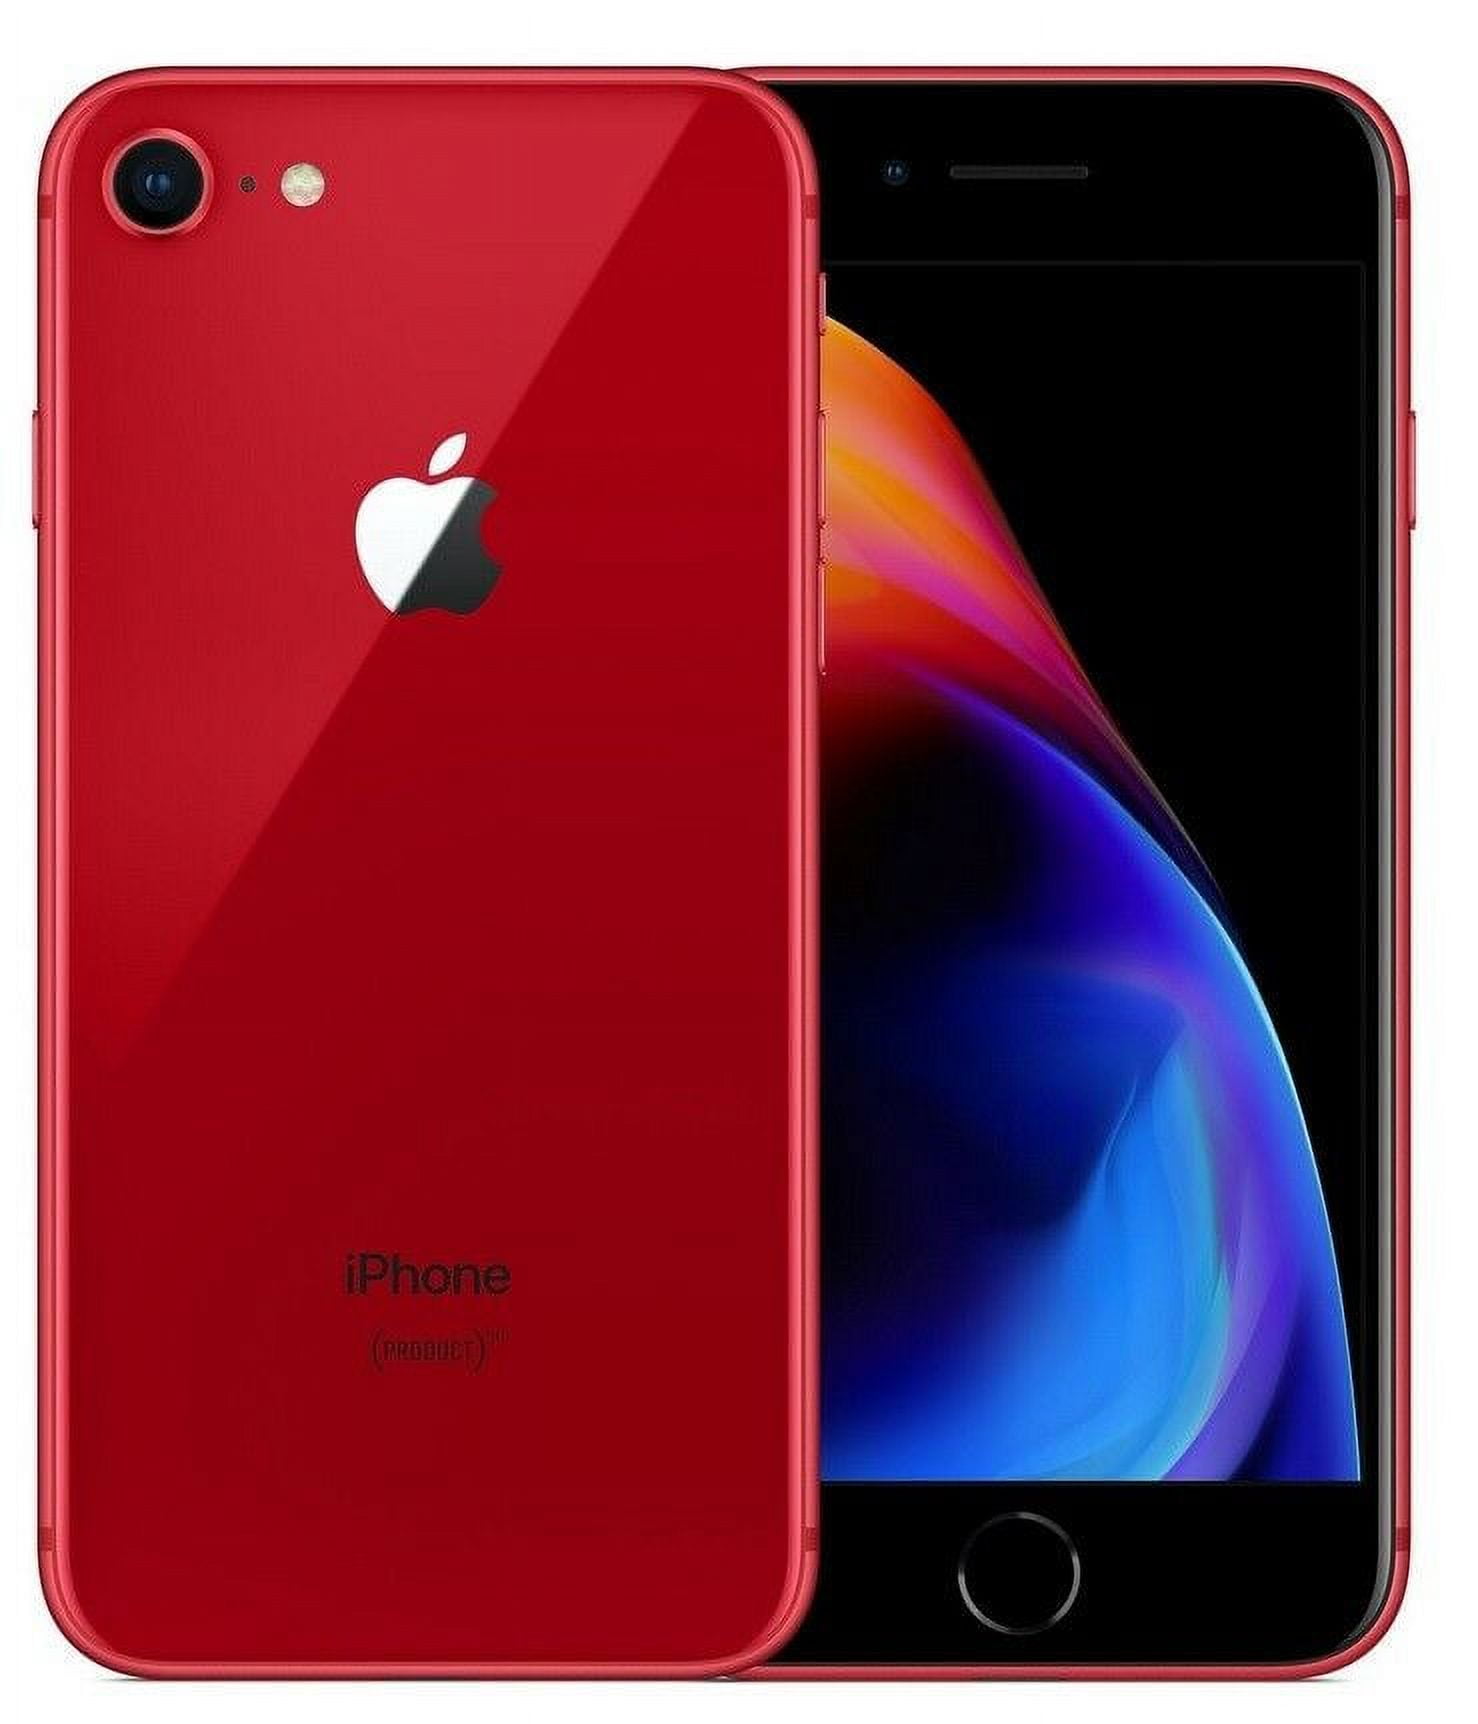 Apple iPhone 8 A1905 64GB Red (US Model) - Factory Unlocked Cell 